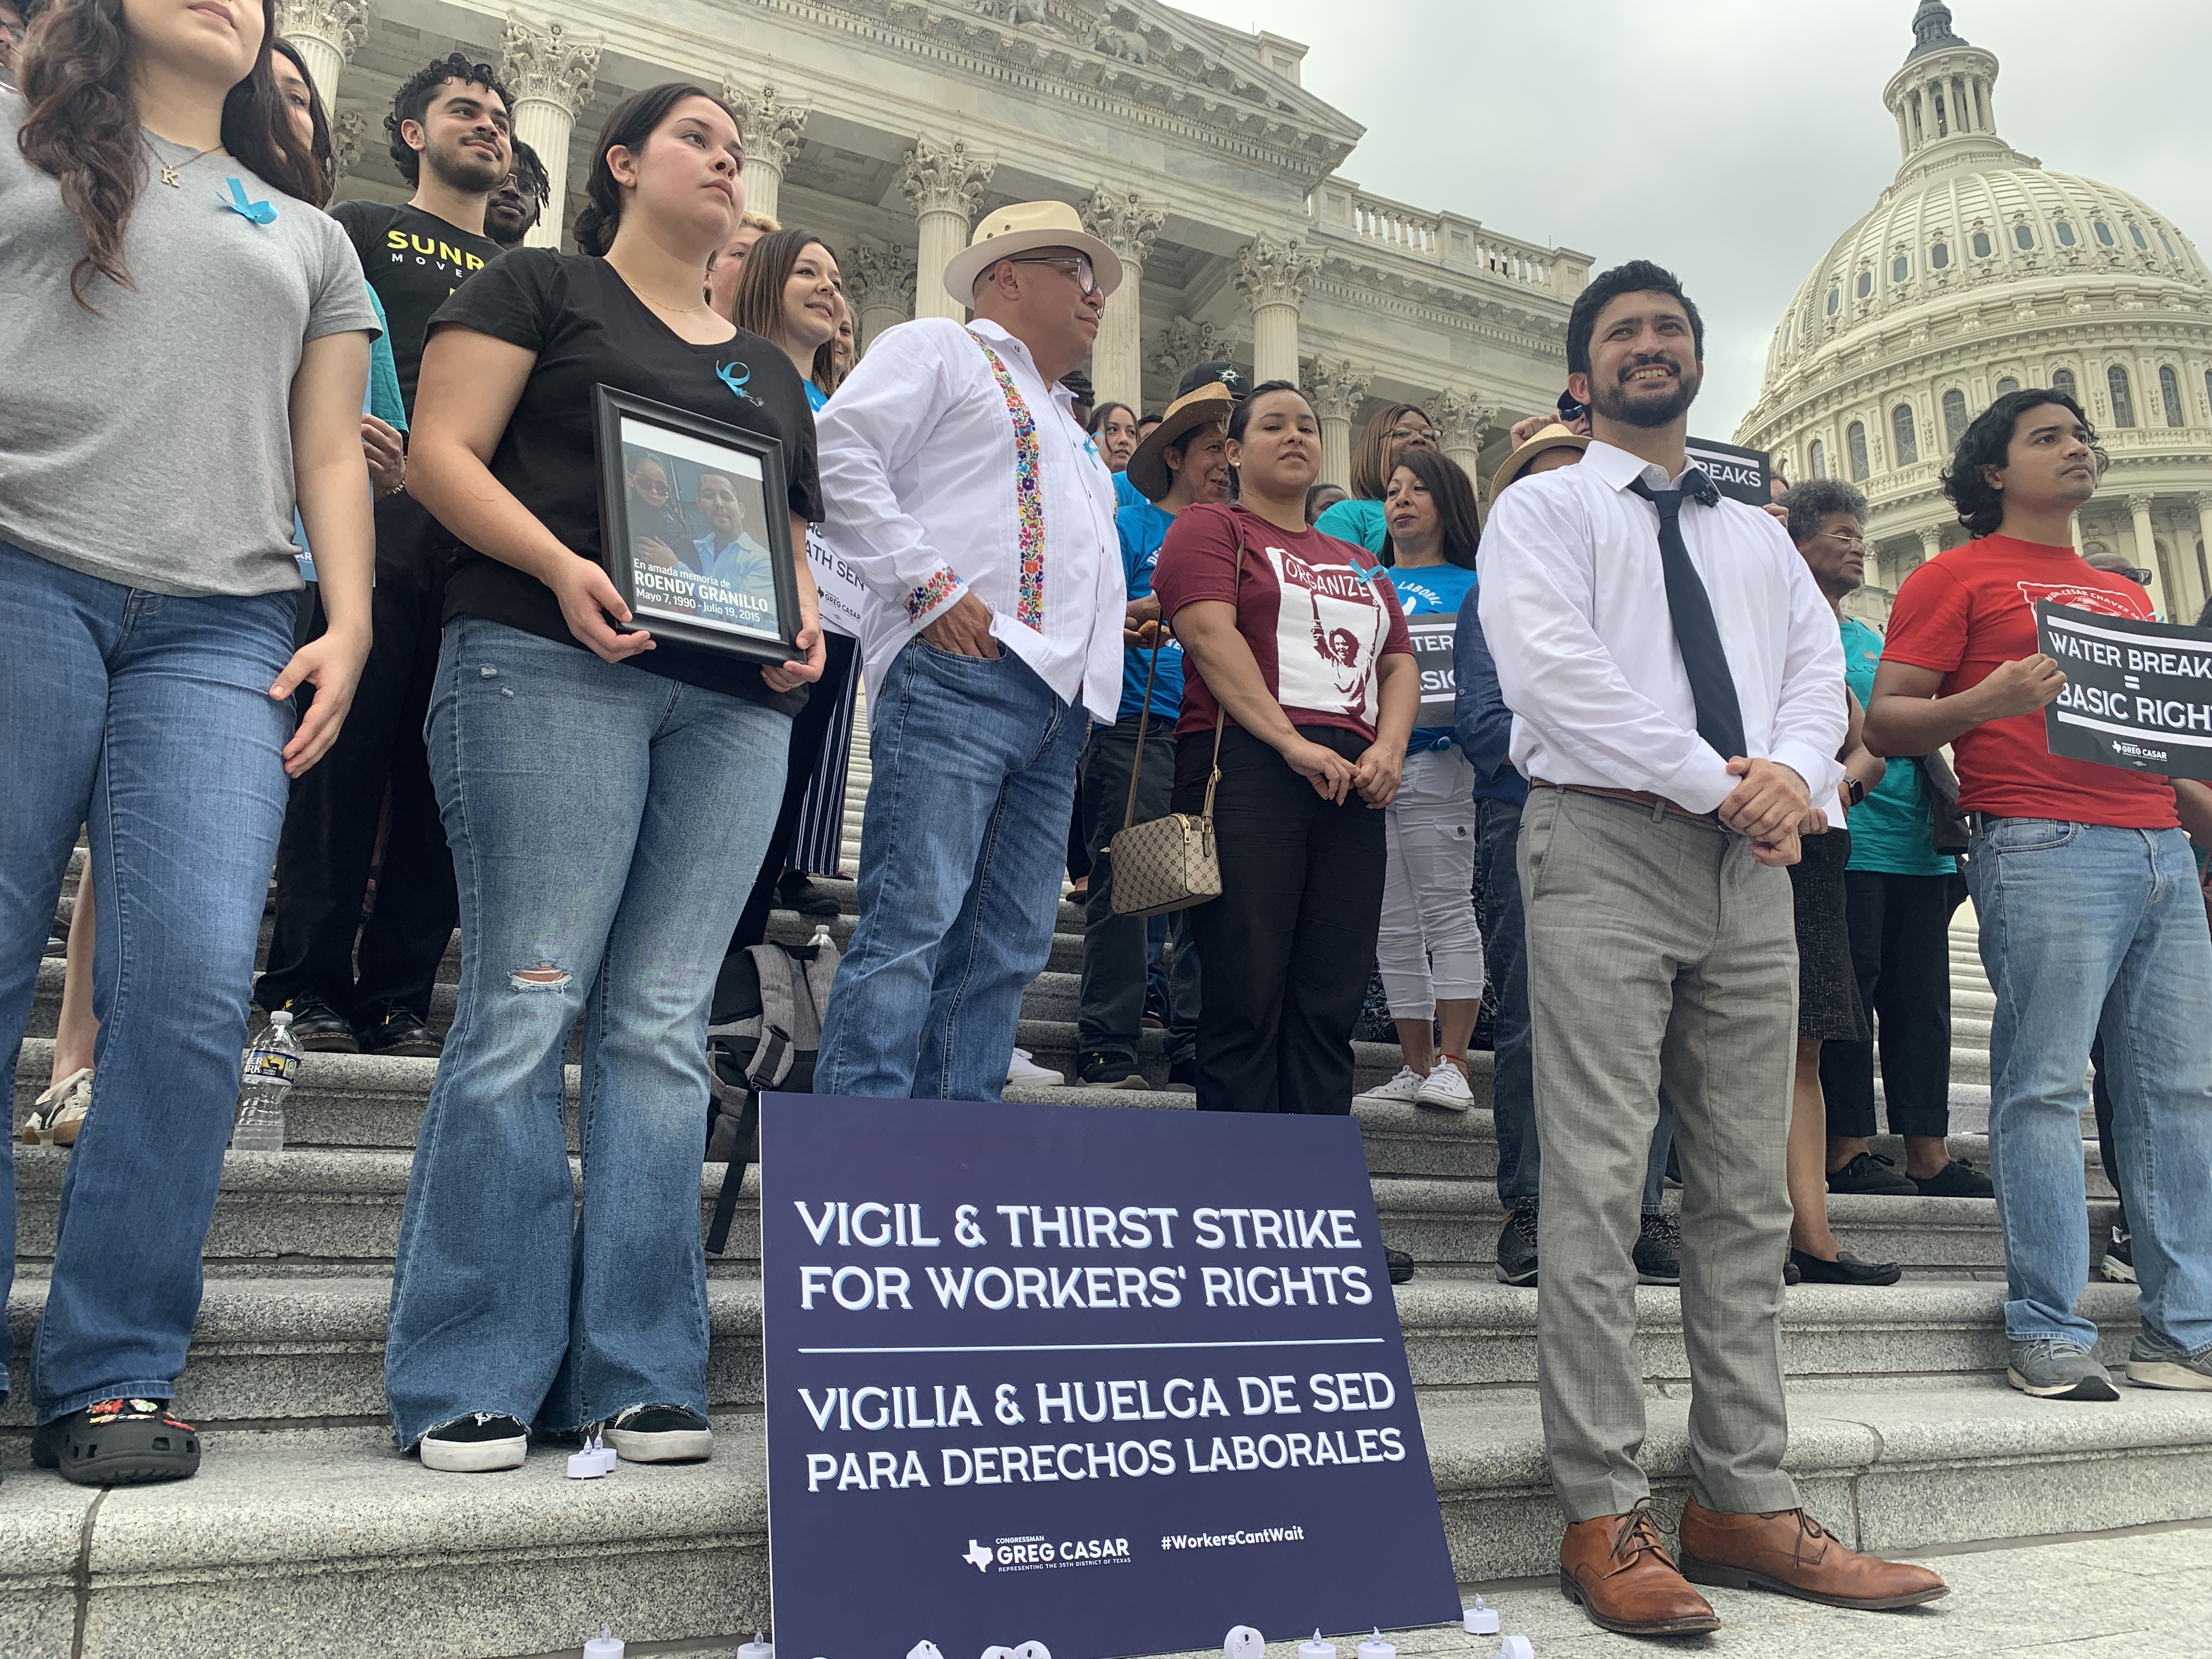 Rep. Greg Casar stands amongst a crowd of protesters at the U.S. Capitol. A sign in front of the group reads, "Vigil & thirst strike for workers' rights | Vigilia & huelga de sed para derechos laborales"